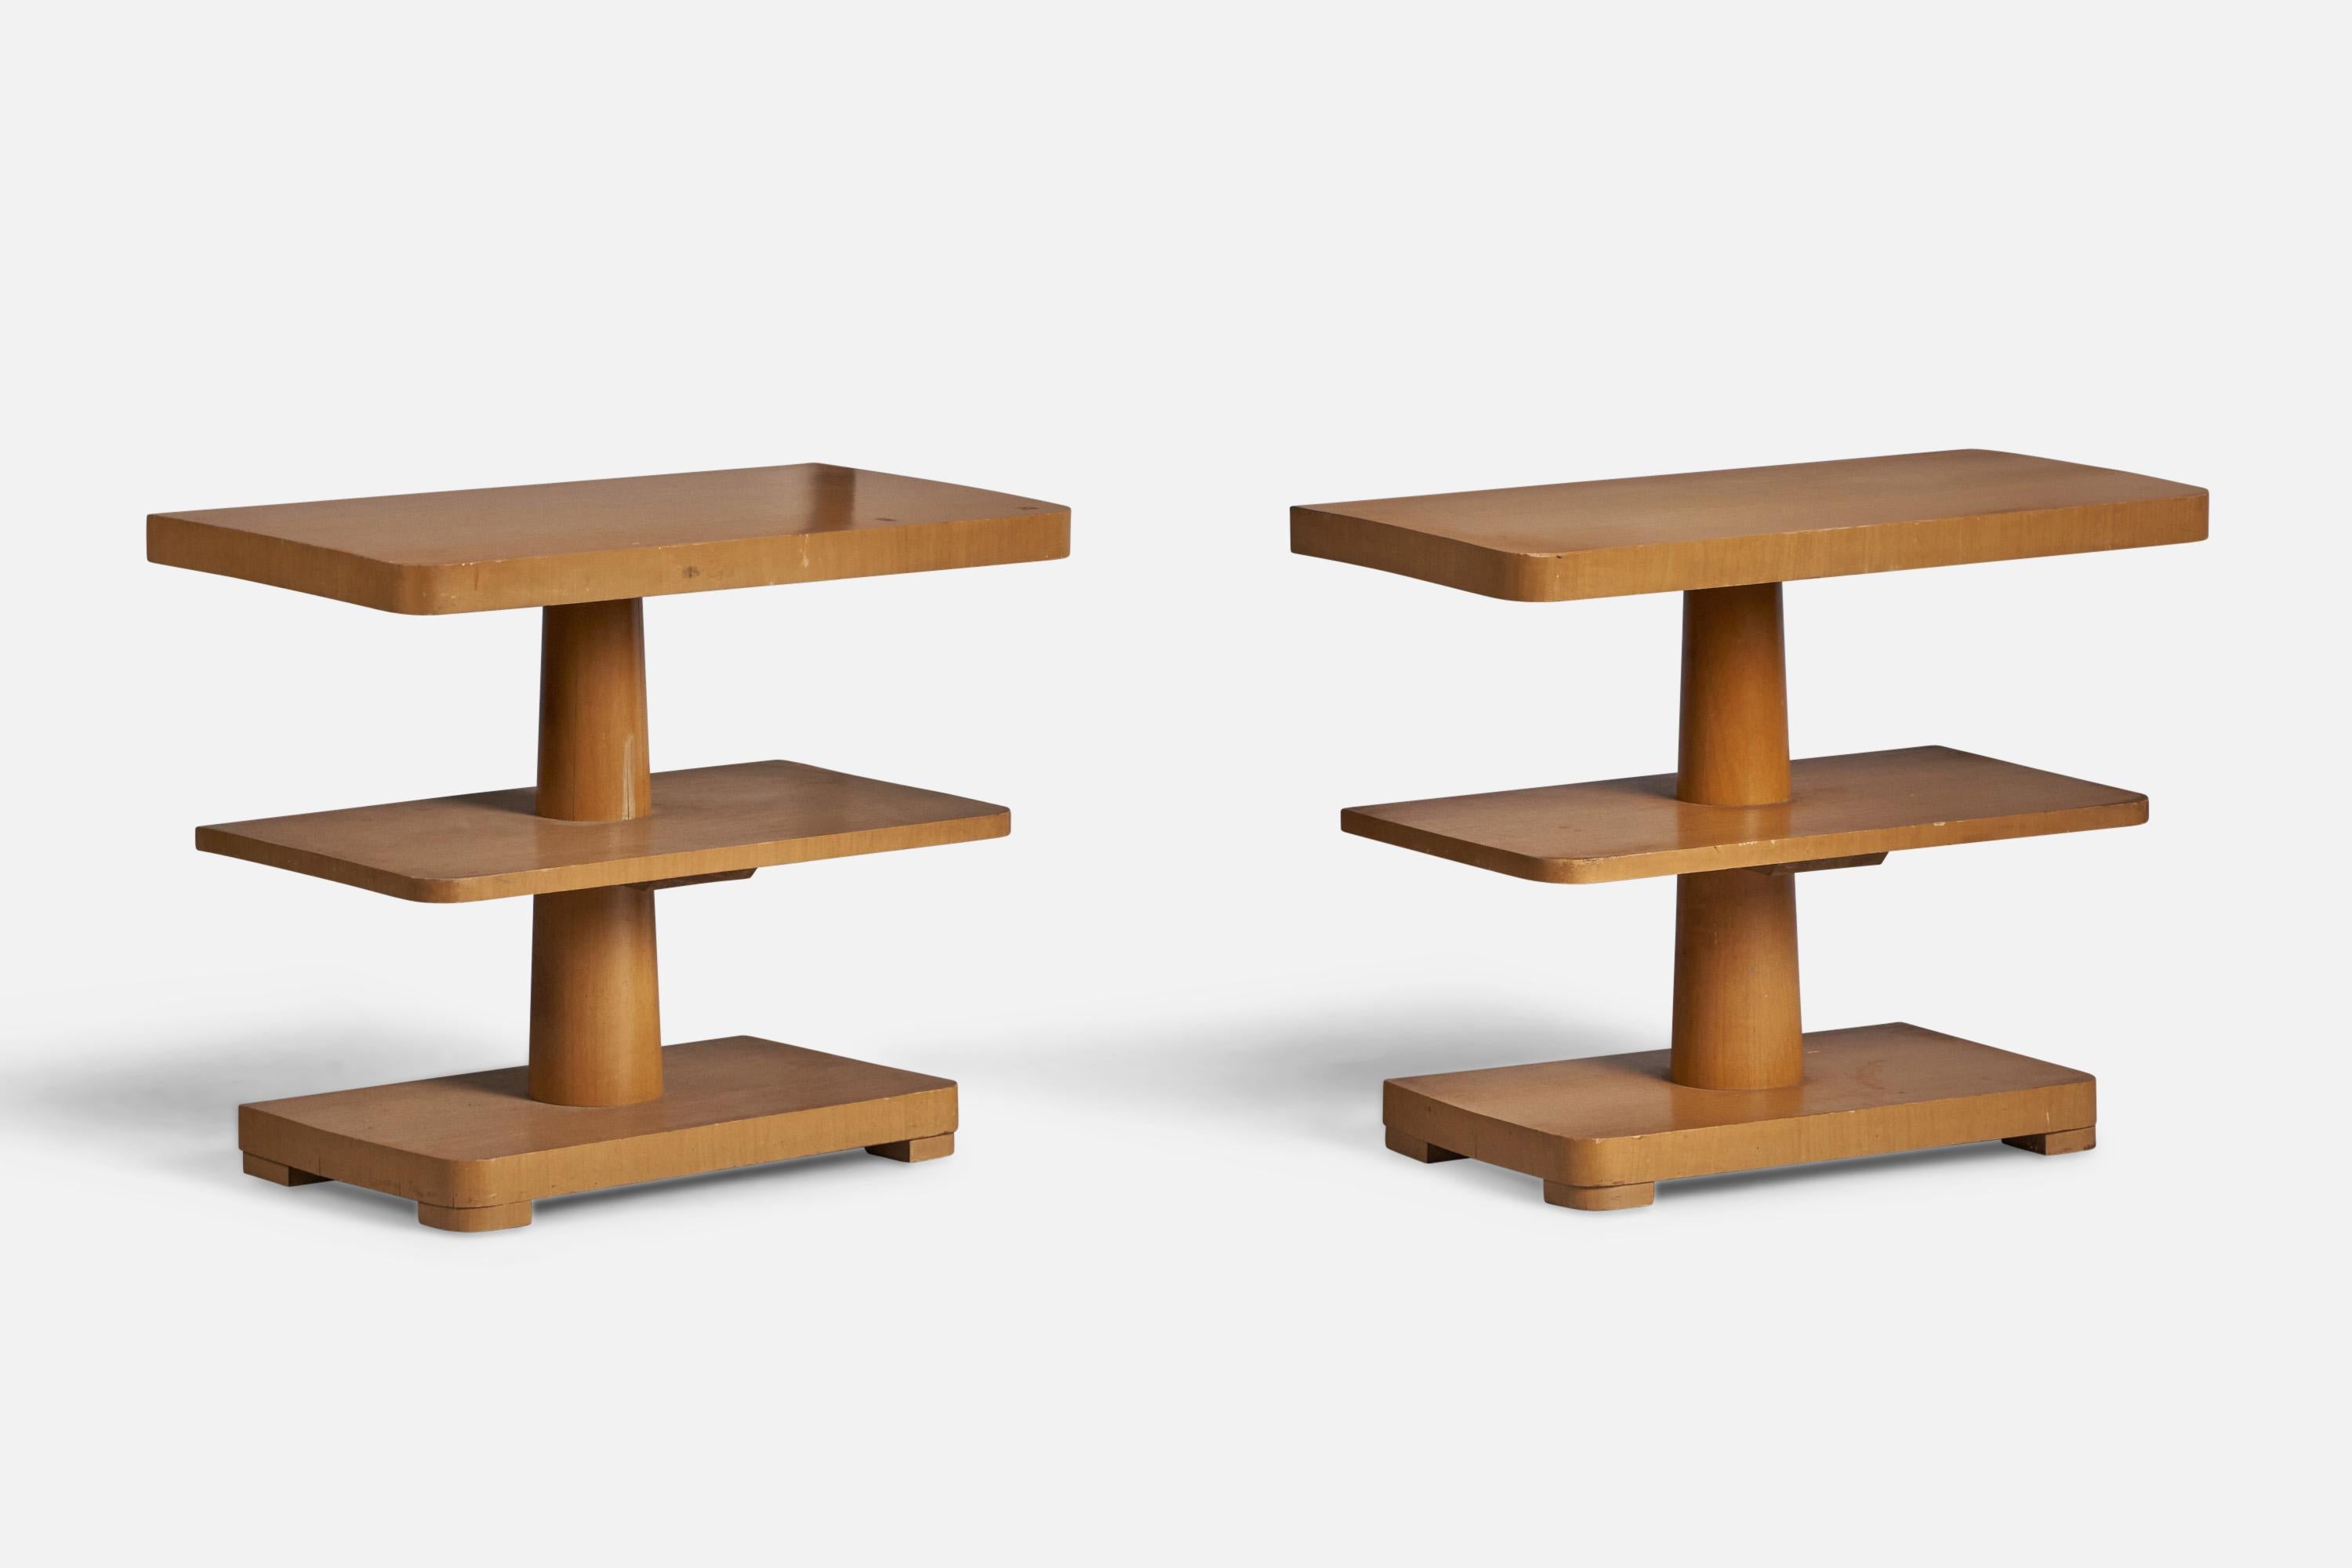 A pair of wood side tables or nightstands, designed and produced in the US, 1940s.